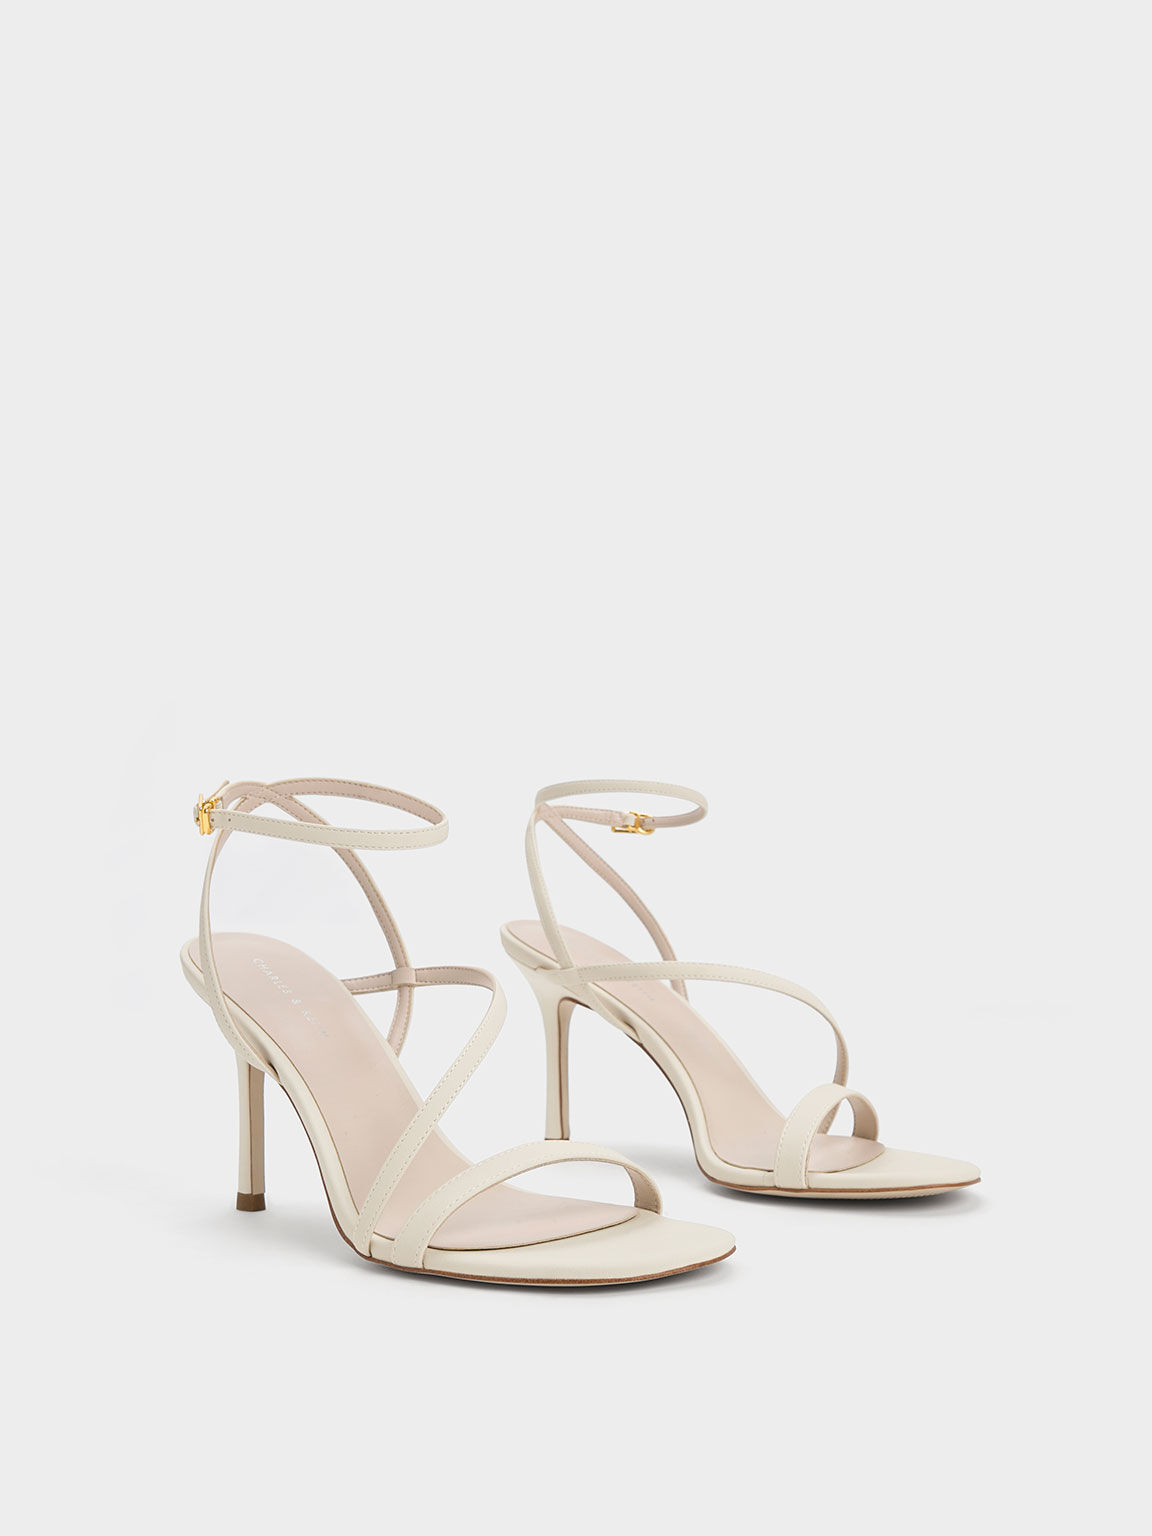 Chalk Asymmetric Strappy Heeled Sandals - CHARLES & KEITH KH